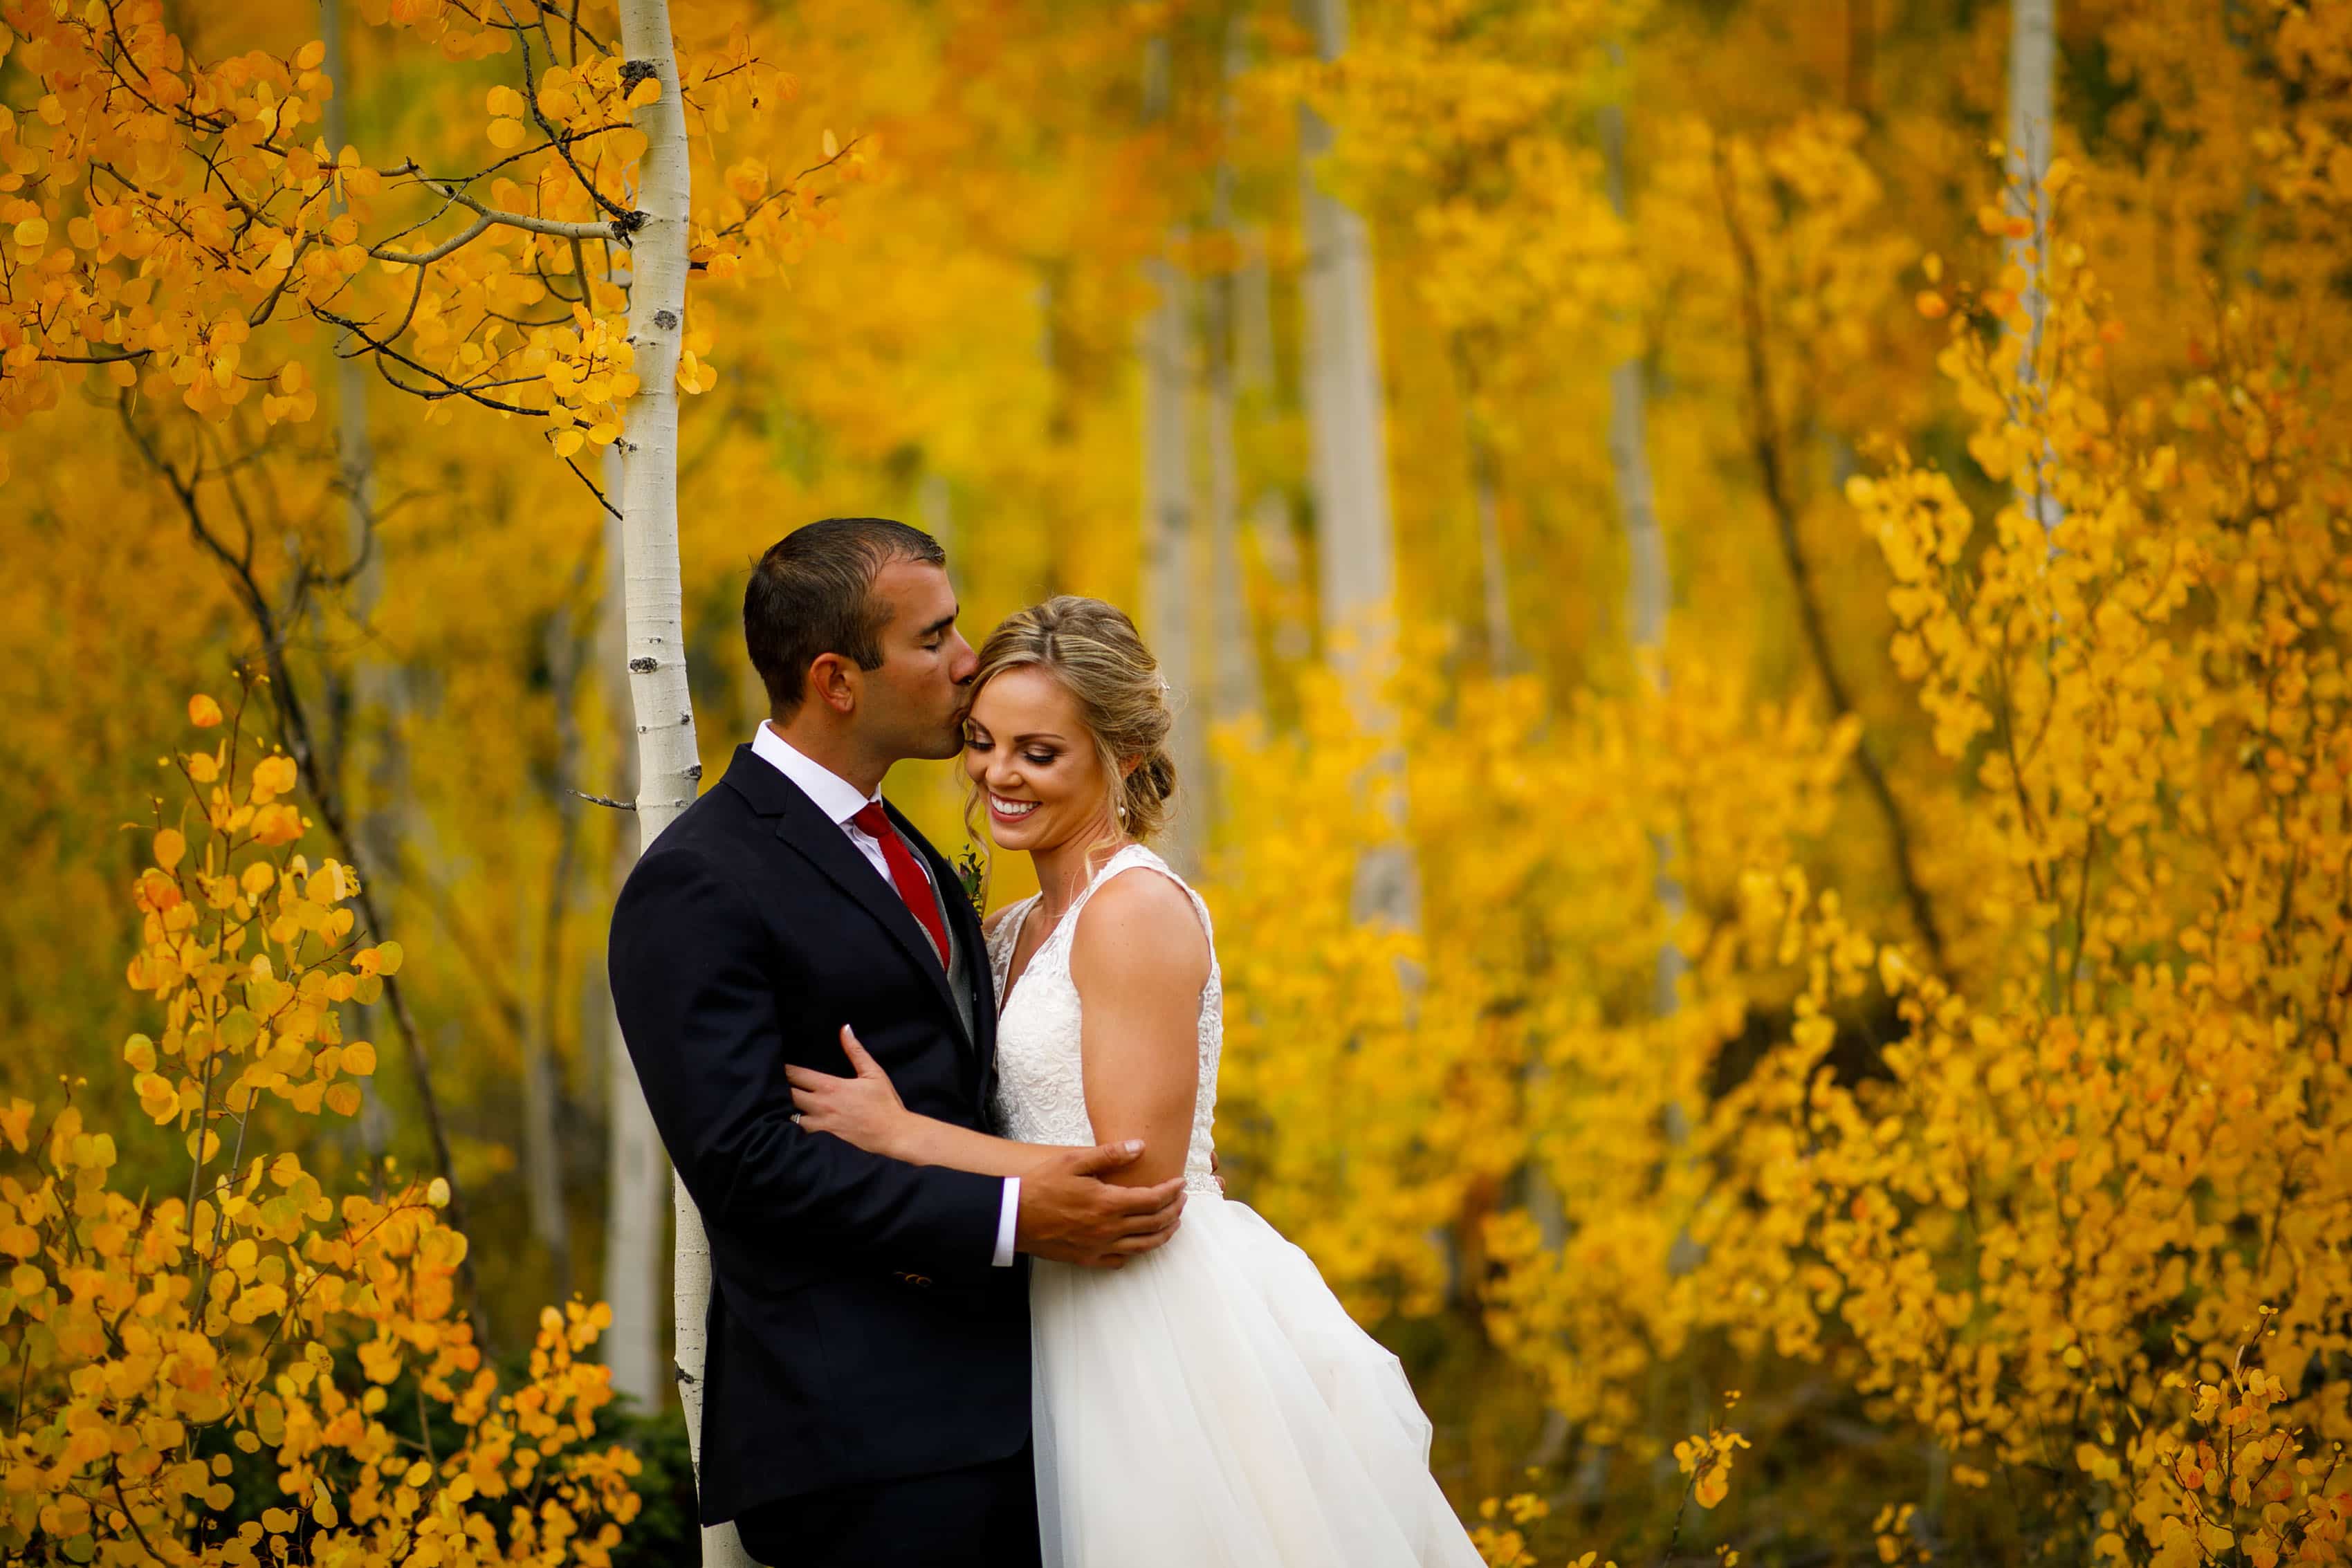 Meghan & Kevin’s Fall Colors Wedding at Camp Hale